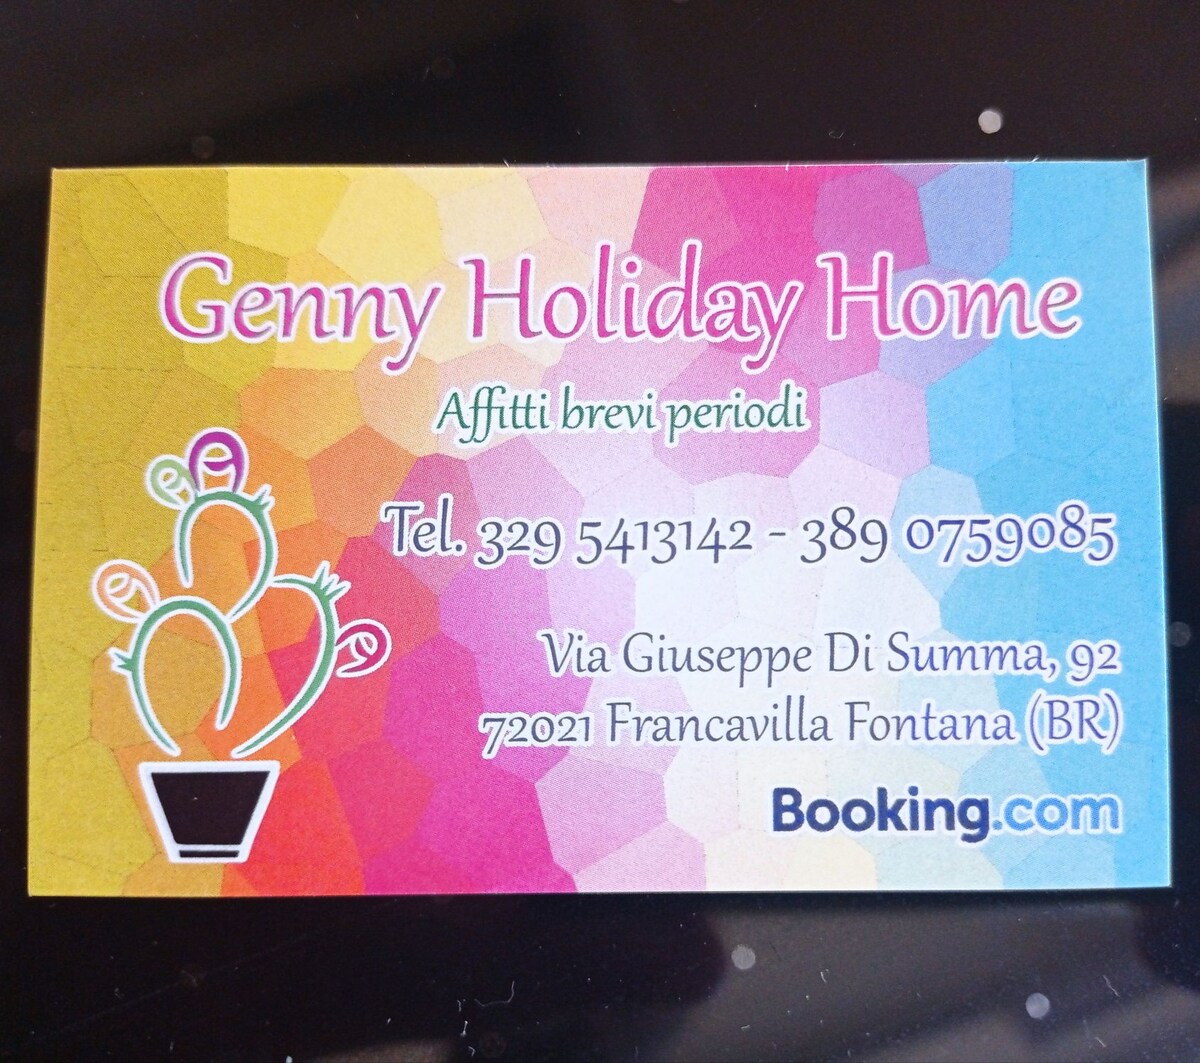 Genny Holiday Home
Affitti brevi